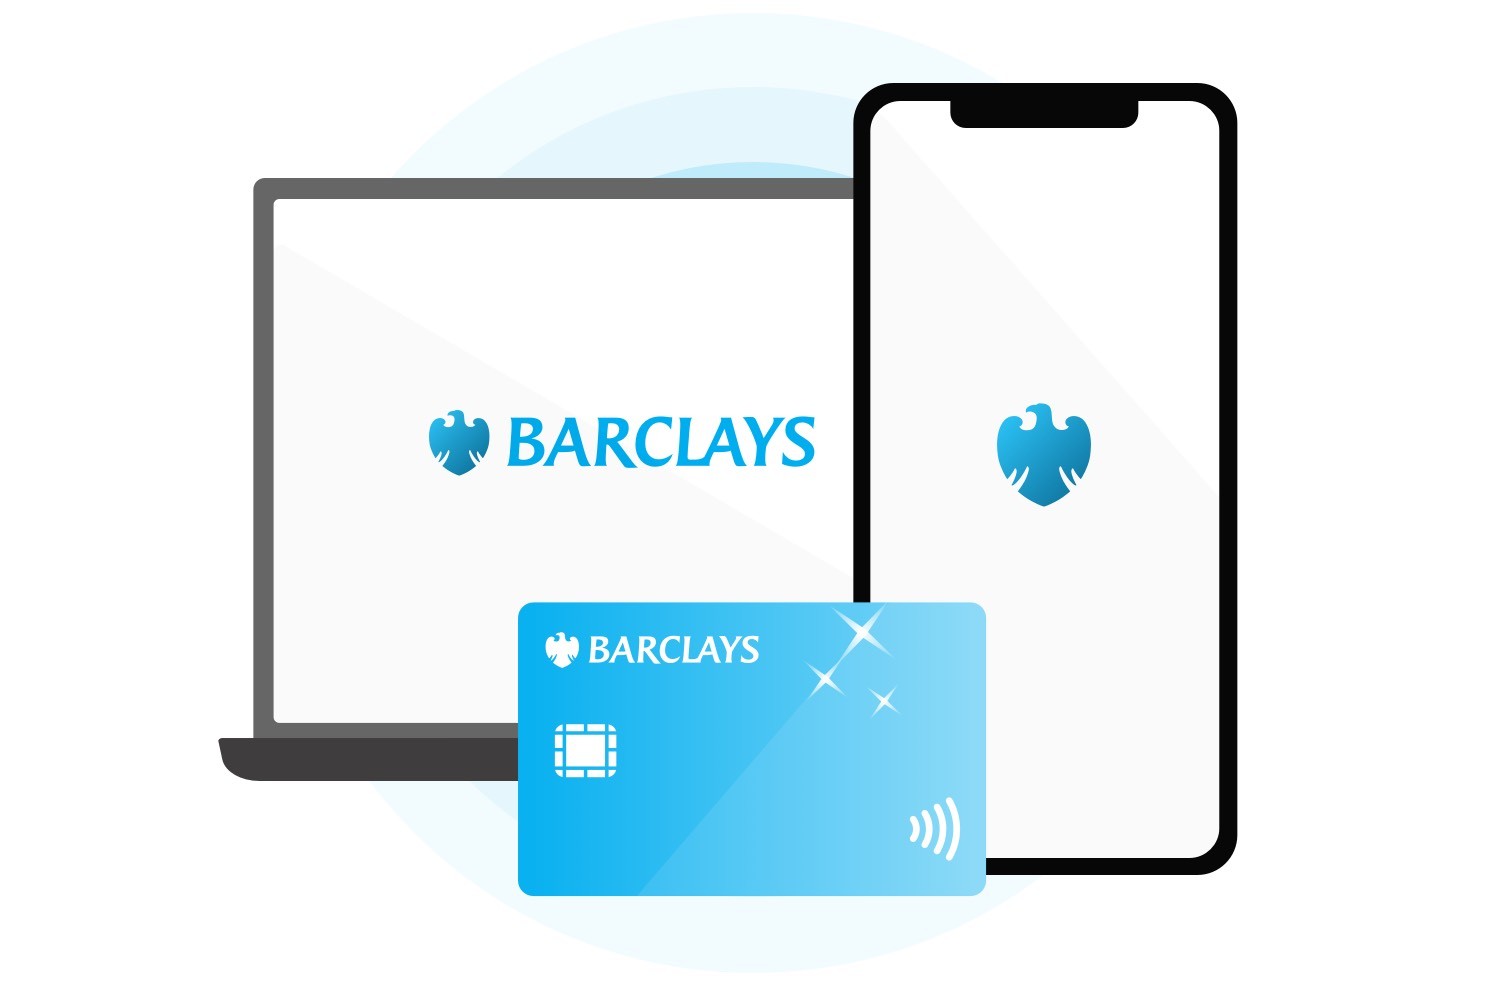 You can manage your money safely and securely using Online Banking and the Barclays app